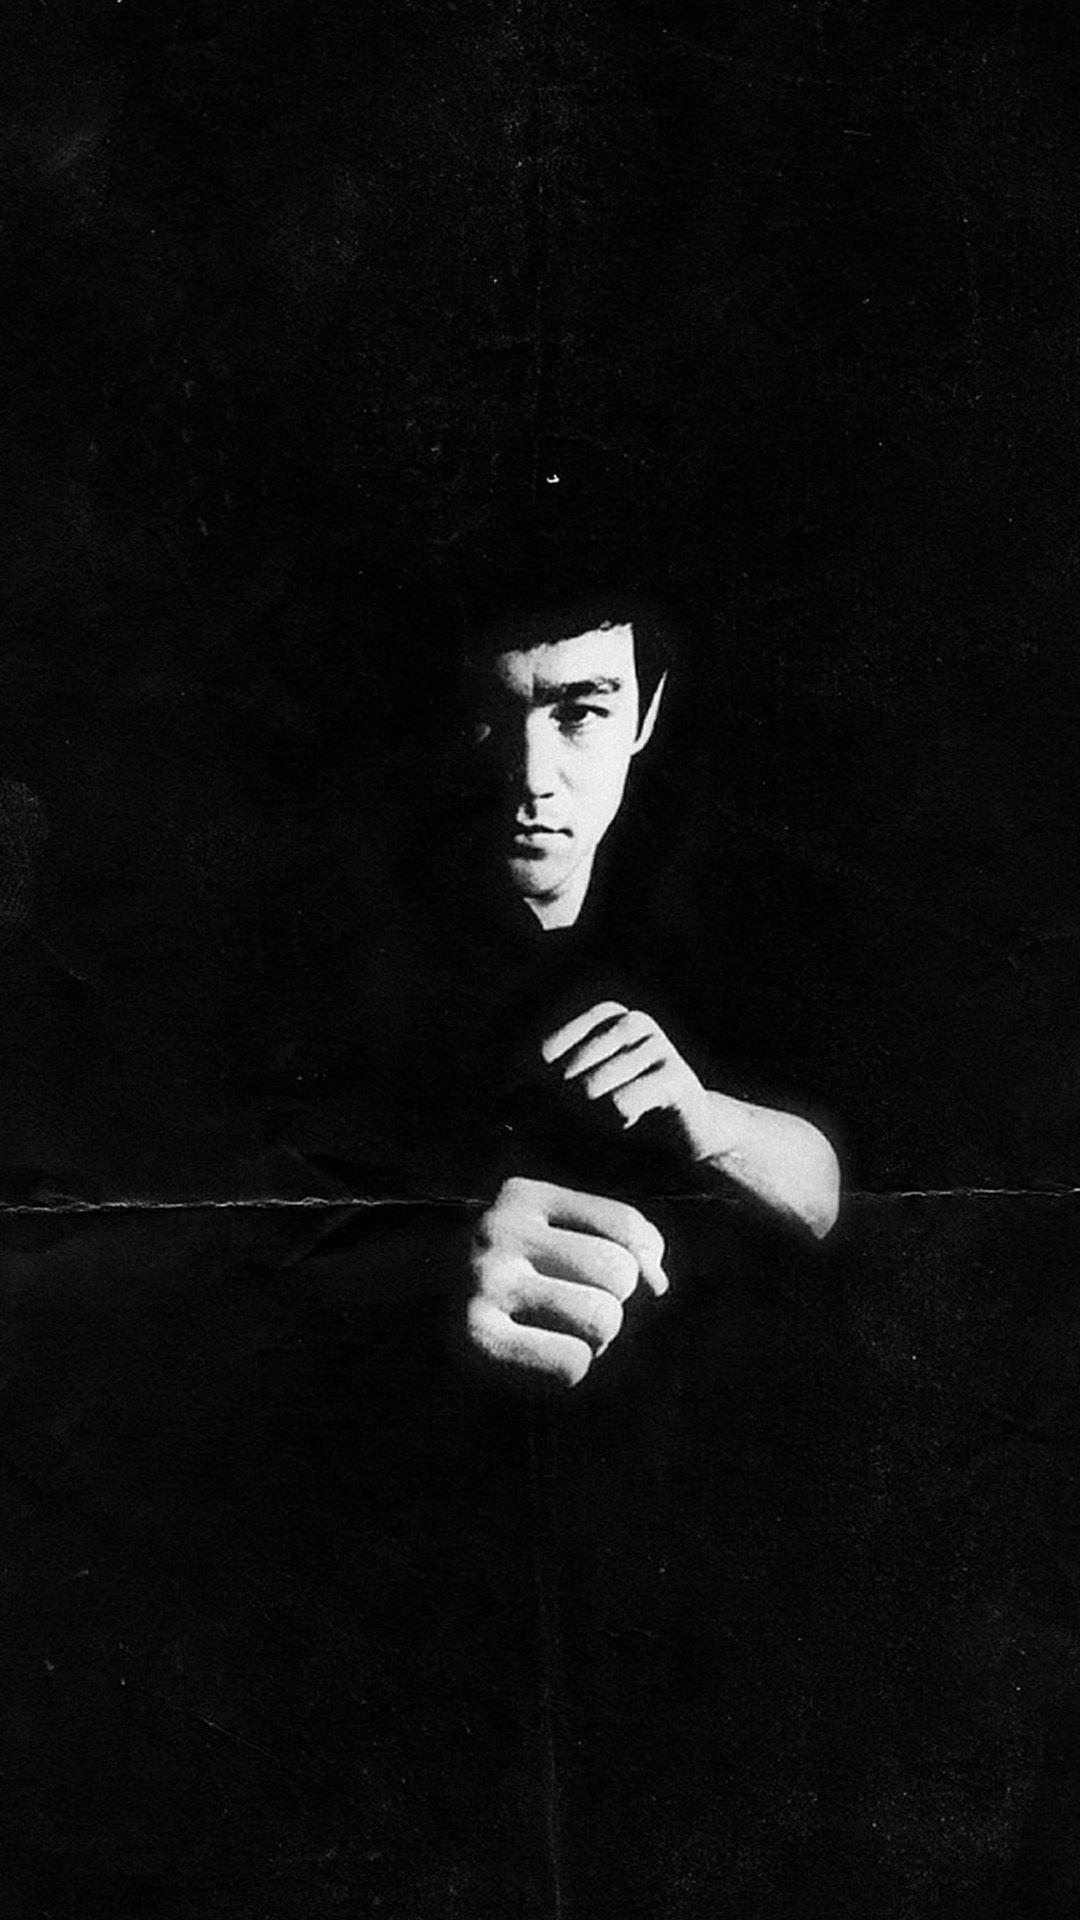 Bruce Lee htc one wallpaper, free and easy to download